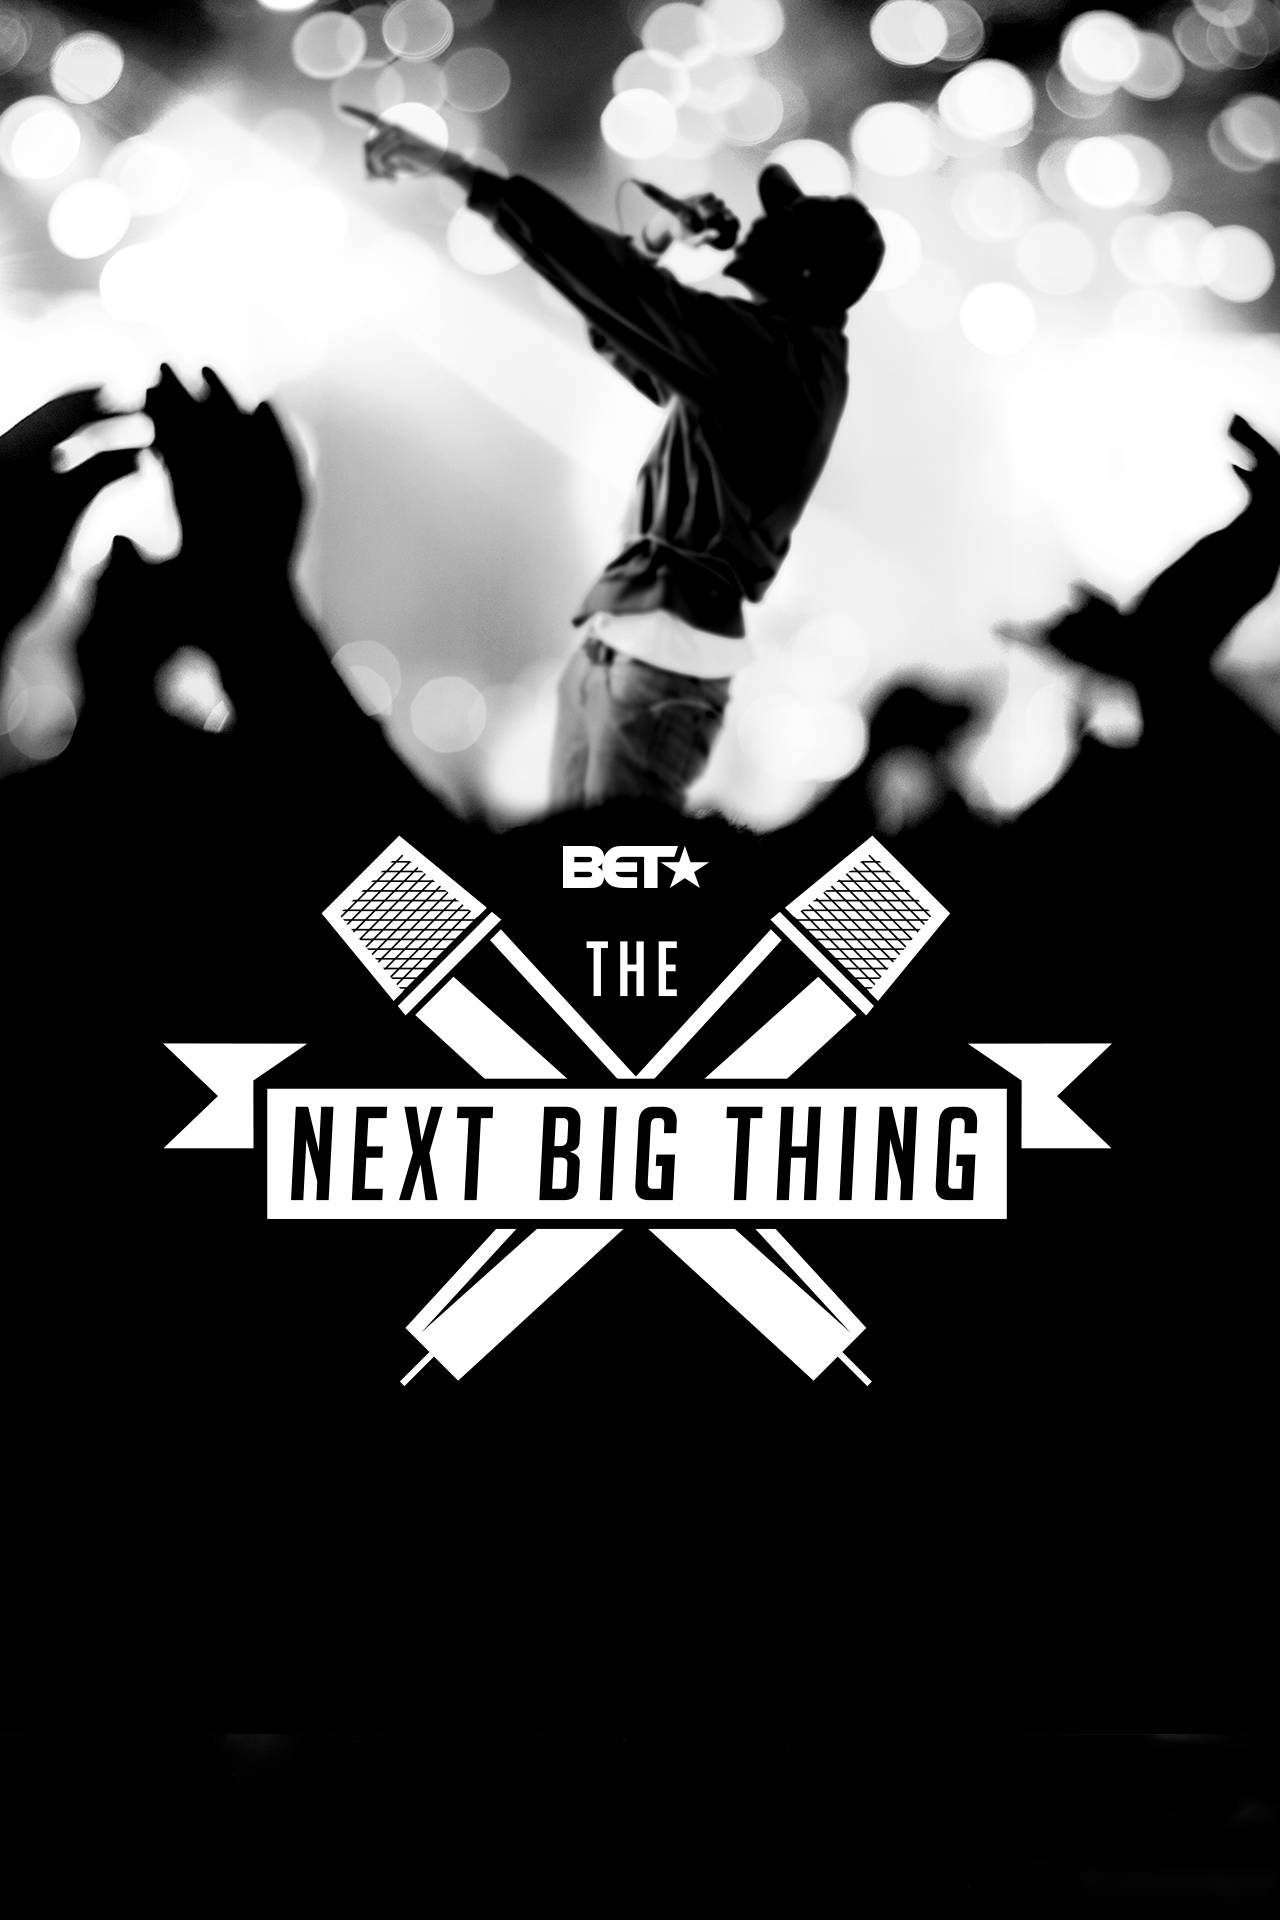 Who is The Next Big Thing? 